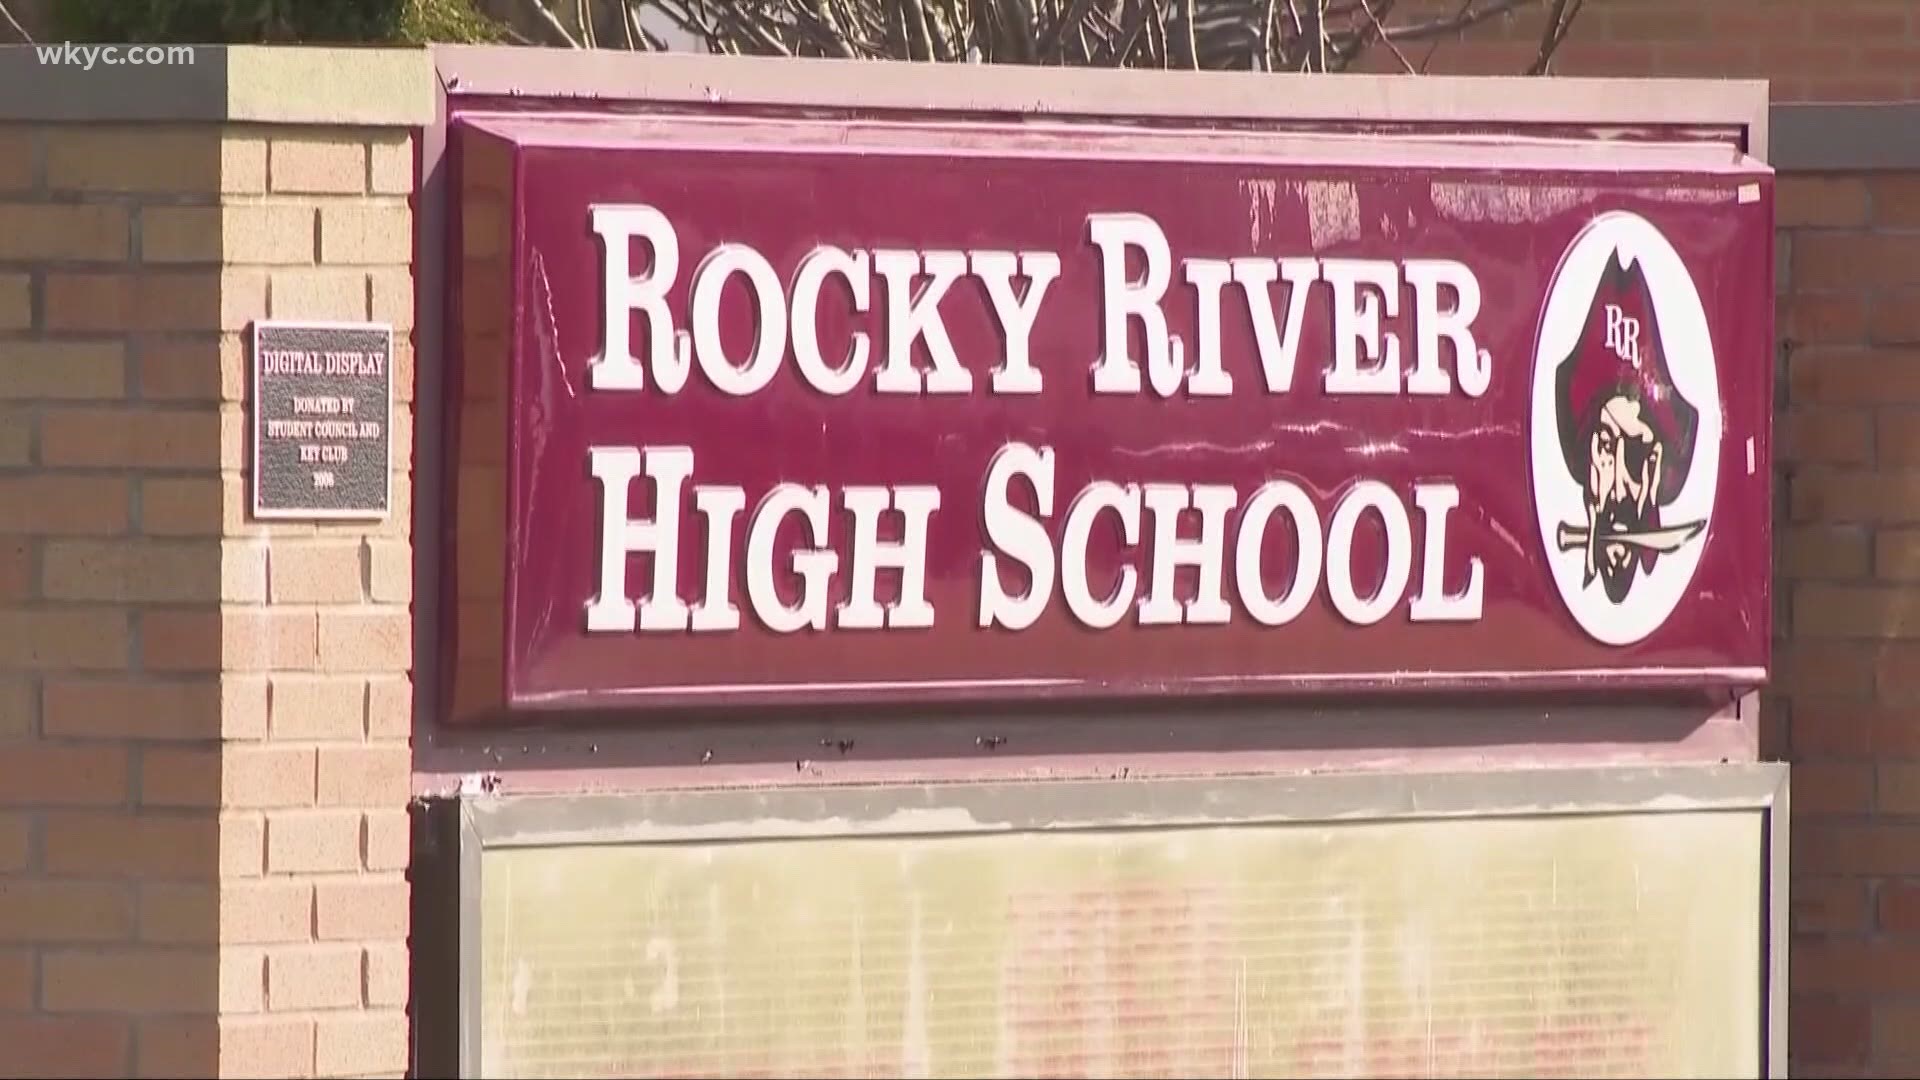 Five Rocky River teachers have now resigned due to the incident. One teacher also retired.